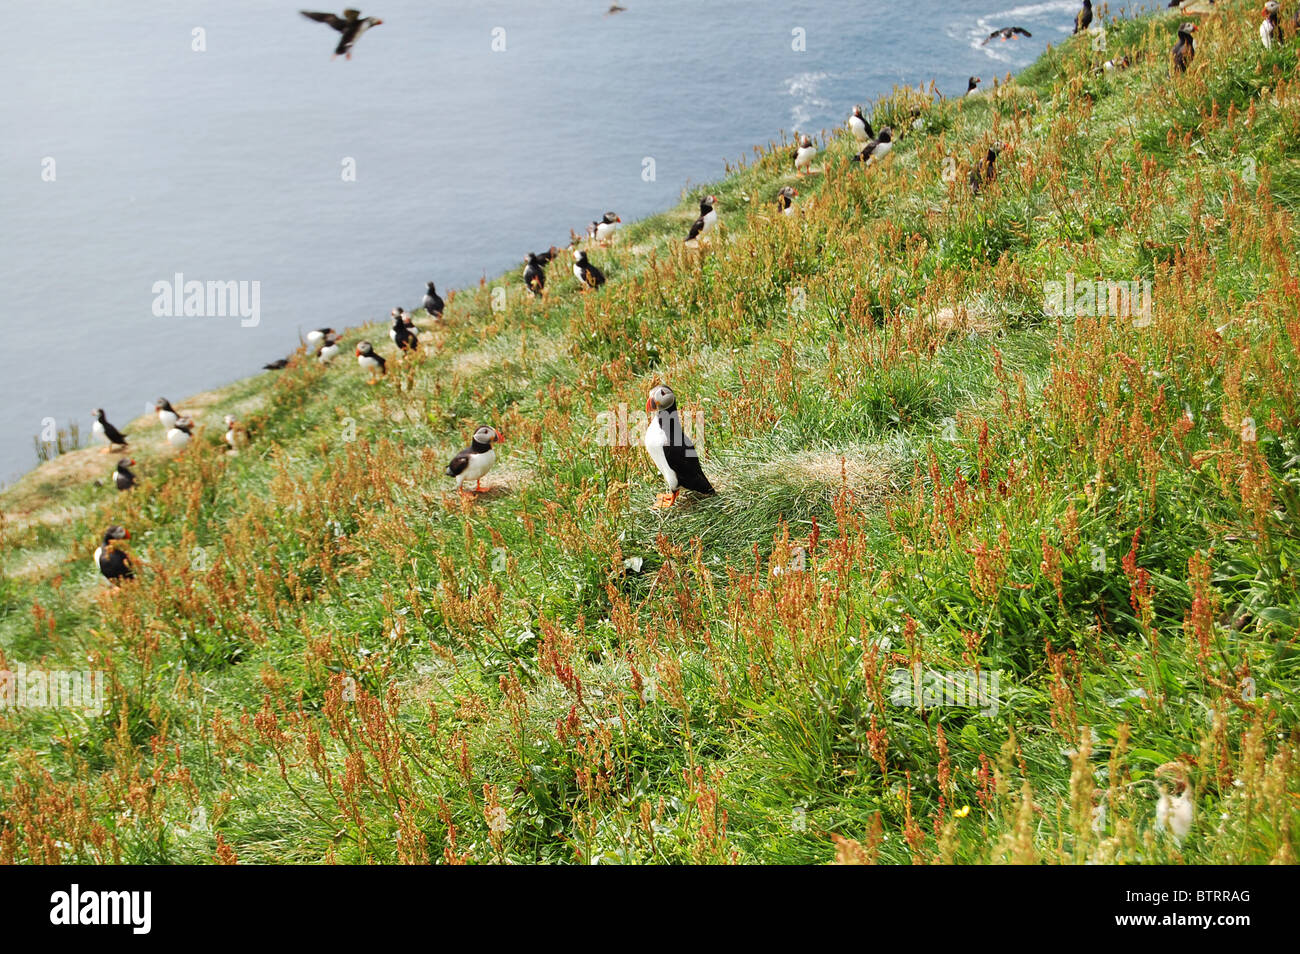 A colony of puffins on Mykines, Faroe Islands Stock Photo